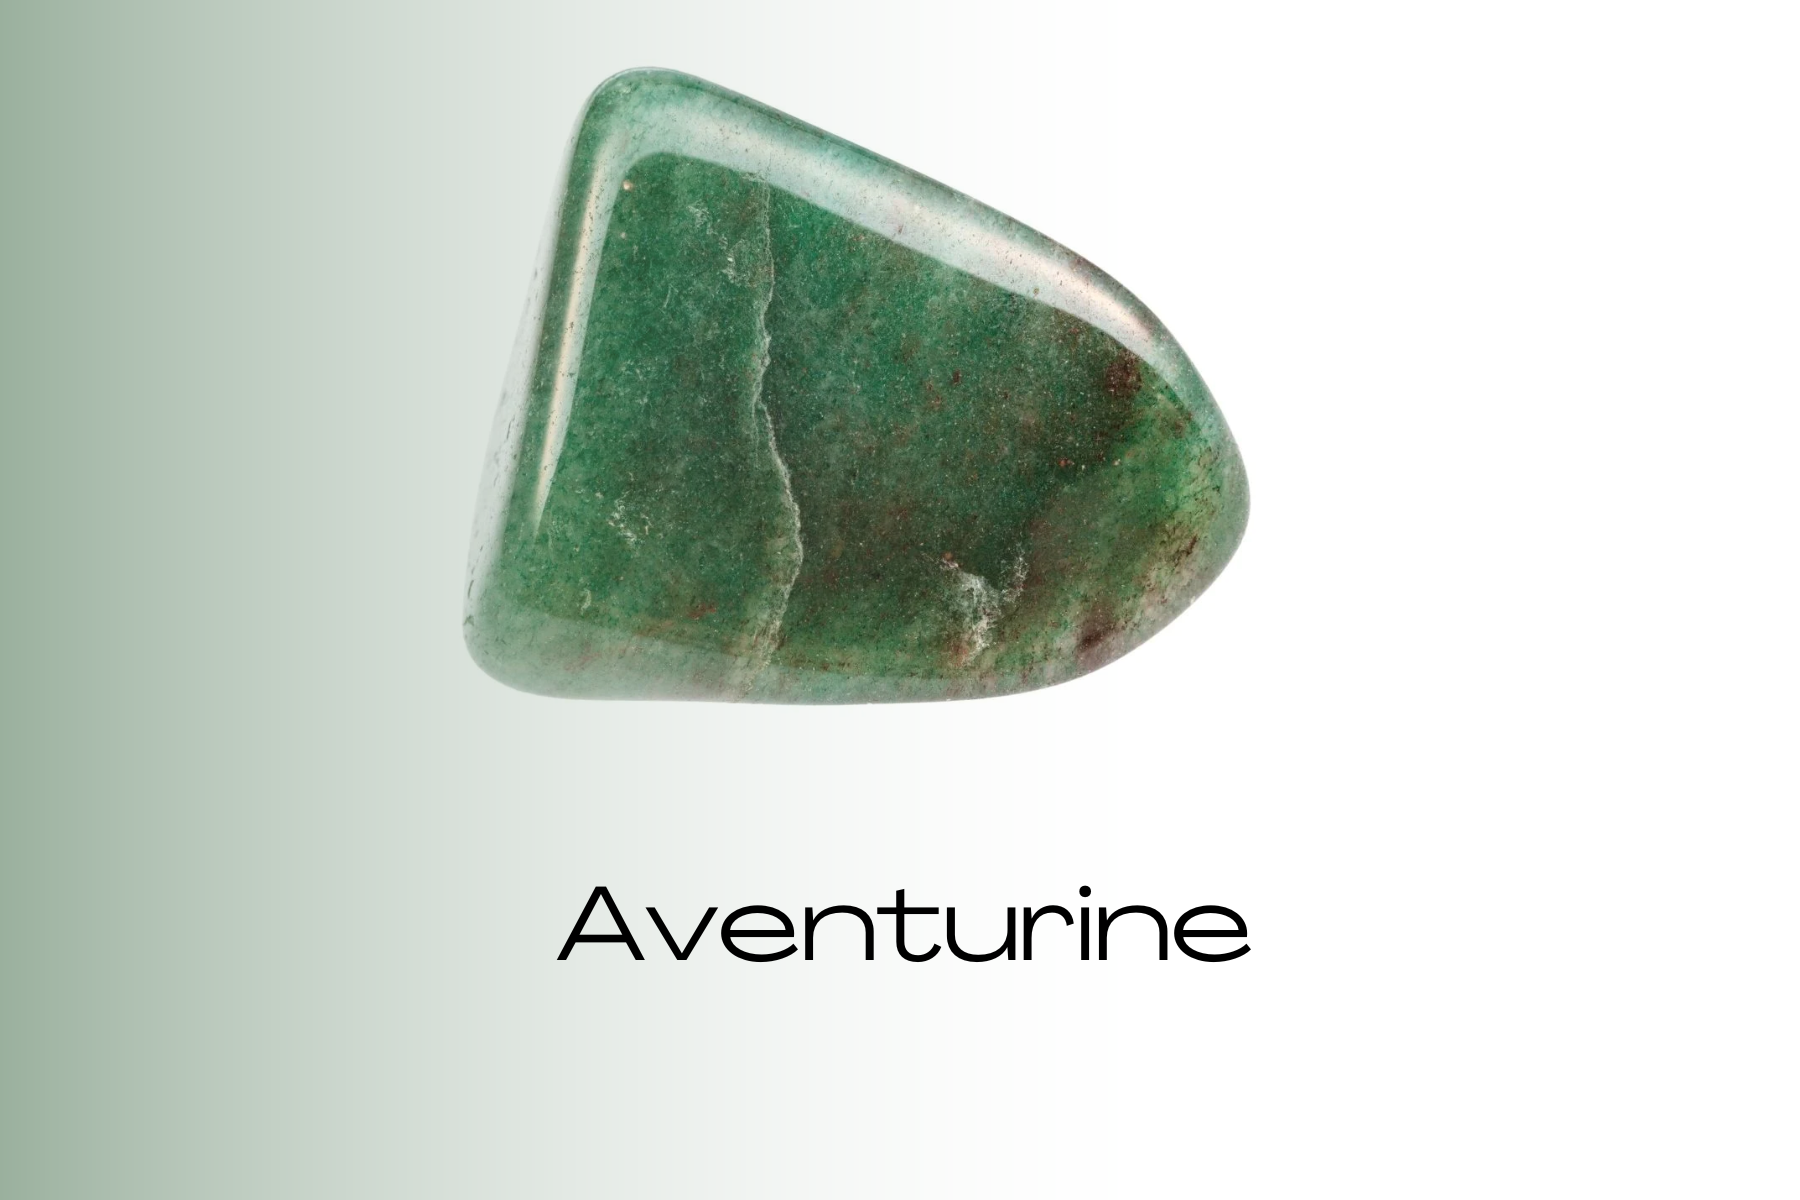 A smooth and shiny rock-formed aventurine stone